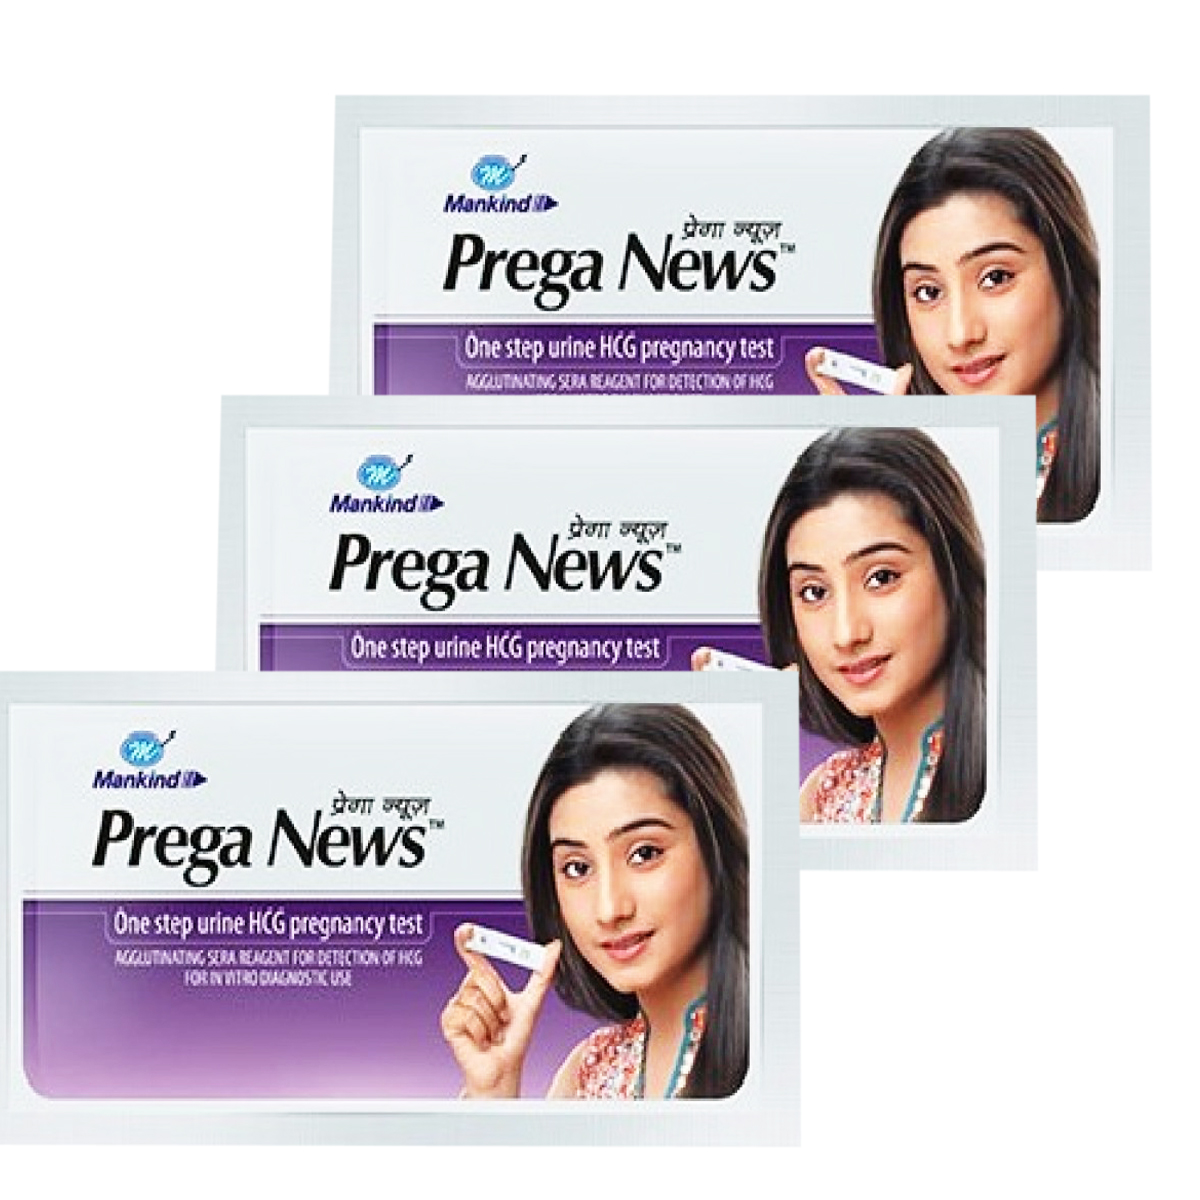 How to Use Prega News ? – How Much Prega News Kit Price ? – One Time Pregnancy Test At Home